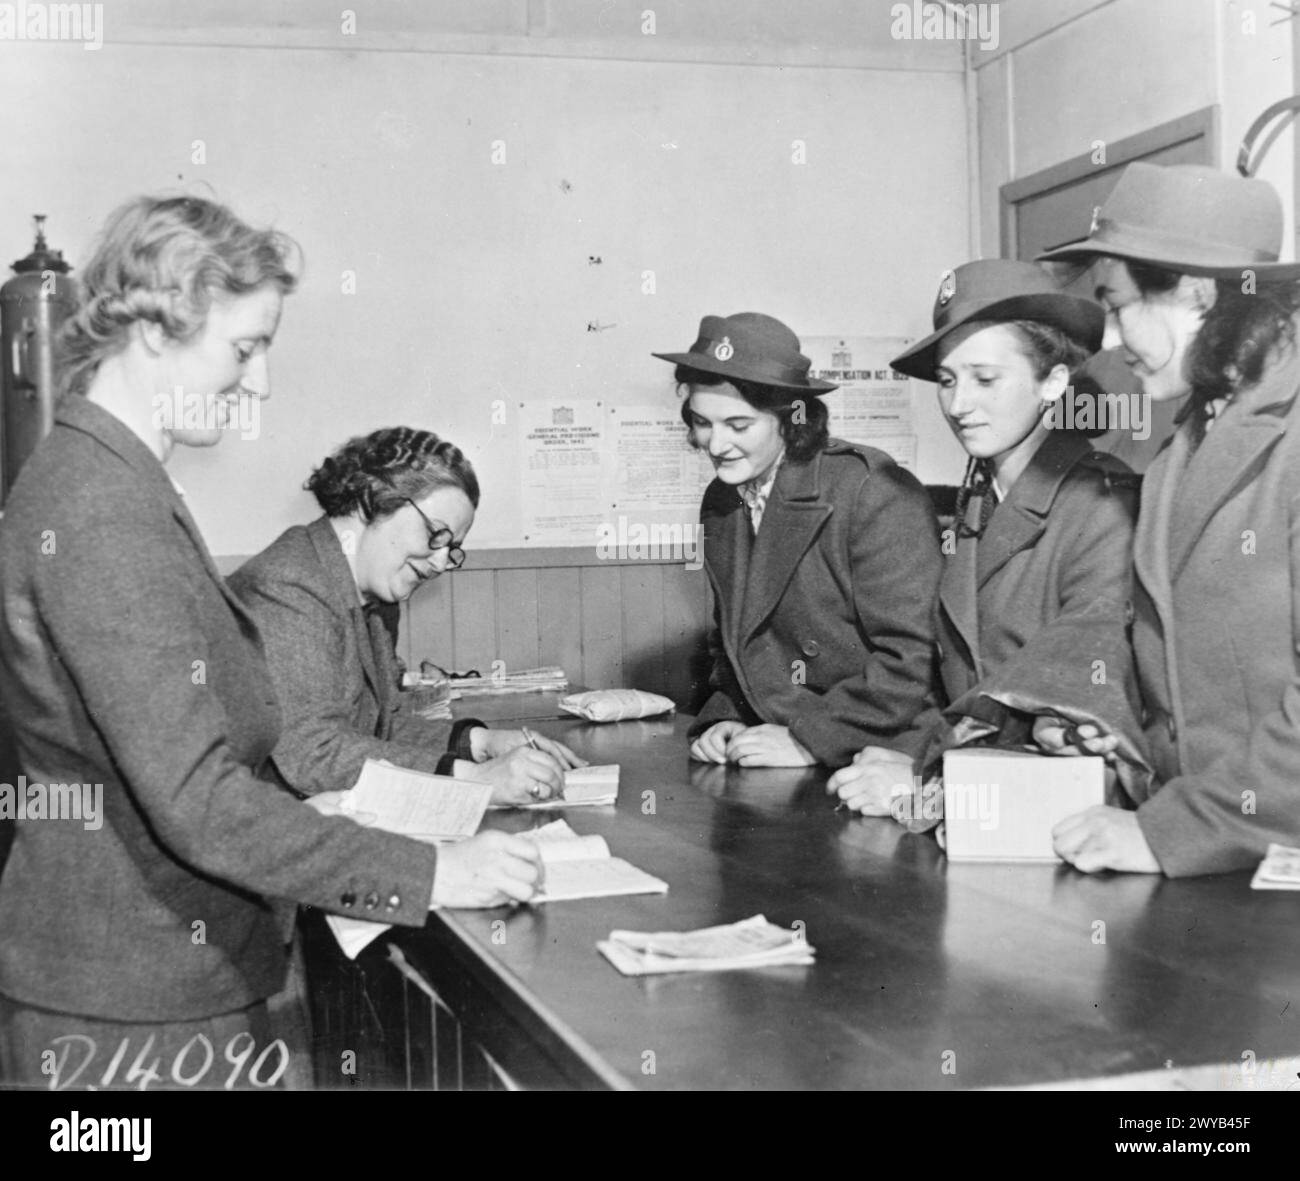 THEY LEARN TO BE LUMBERJILLS: WOMEN'S LAND ARMY FORESTRY TRAINING, CULFORD, SUFFOLK, 1943 - Three new recruits, already in their WLA uniforms, arrive at the training camp at Culford. Miss Ordish (left), the Deputy Superintendent and PT instructor, and Mrs Jackson, Superintendent, receive their ration books and issue their insurance cards before training begins. , Stock Photo